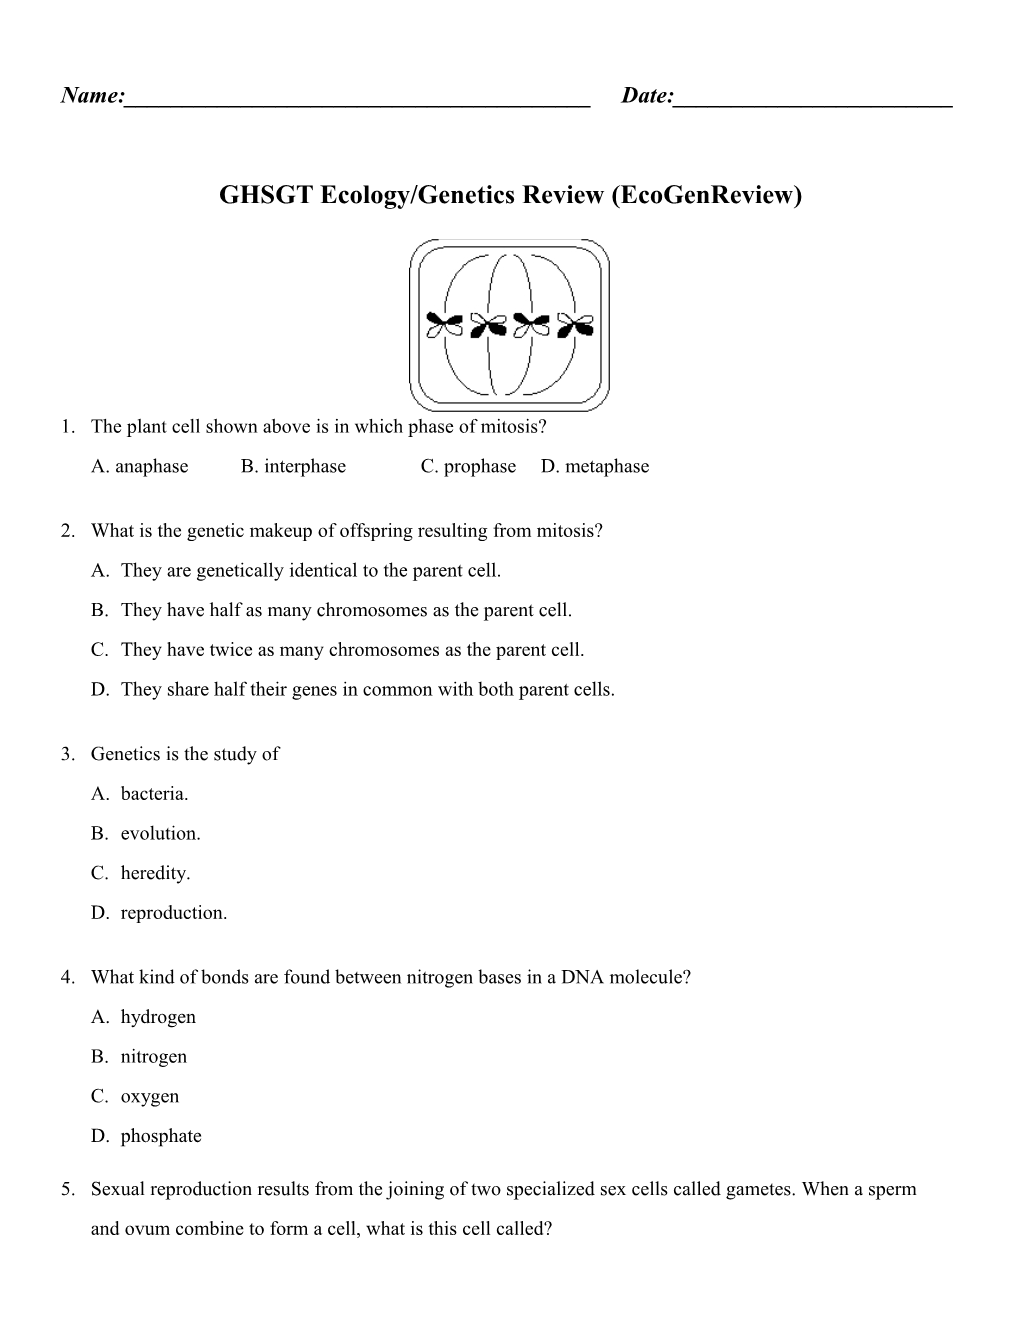 GHSGT Ecology/Genetics Review (Ecogenreview)